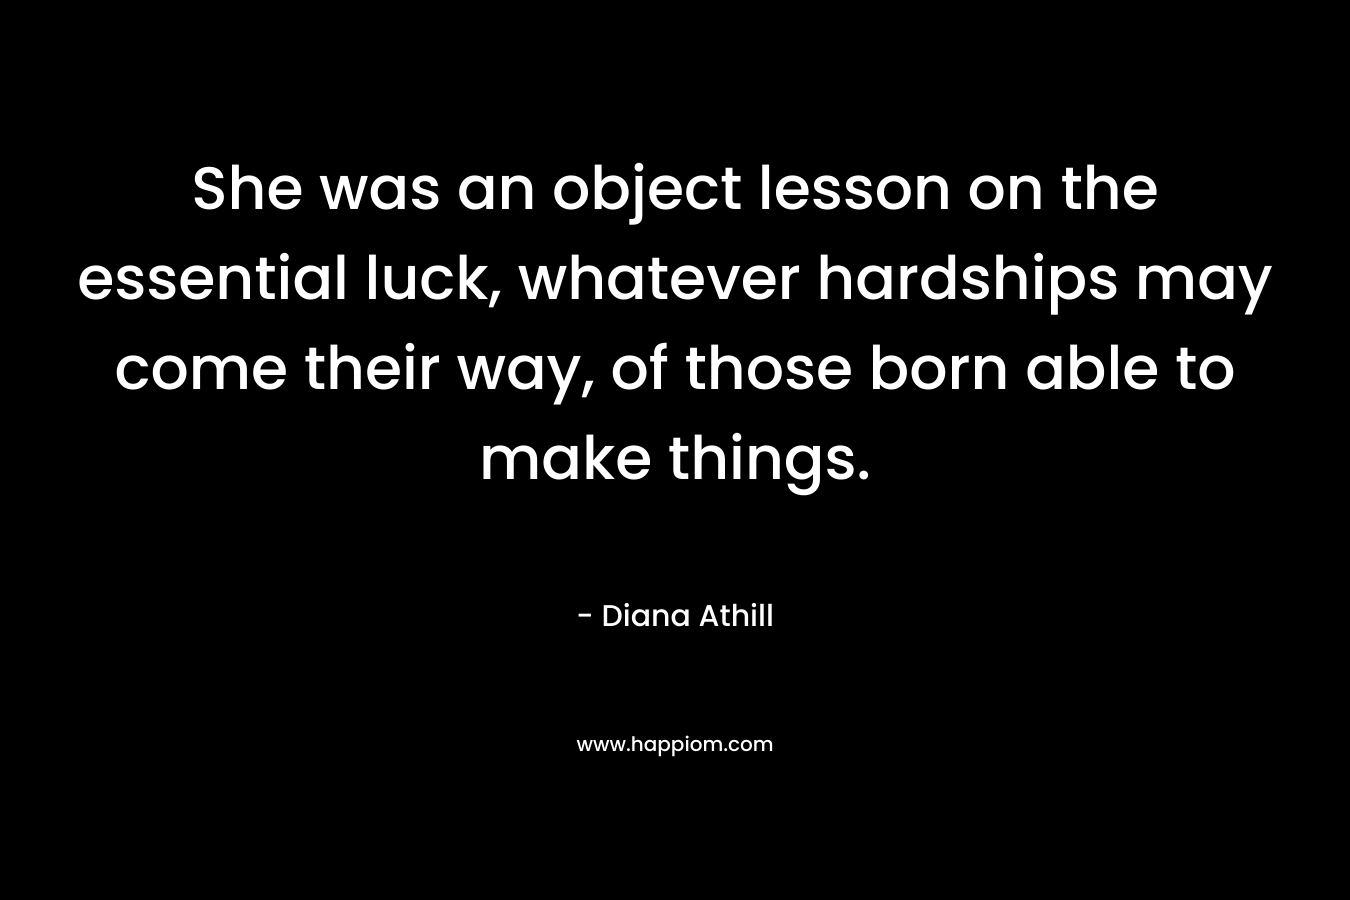 She was an object lesson on the essential luck, whatever hardships may come their way, of those born able to make things. – Diana Athill